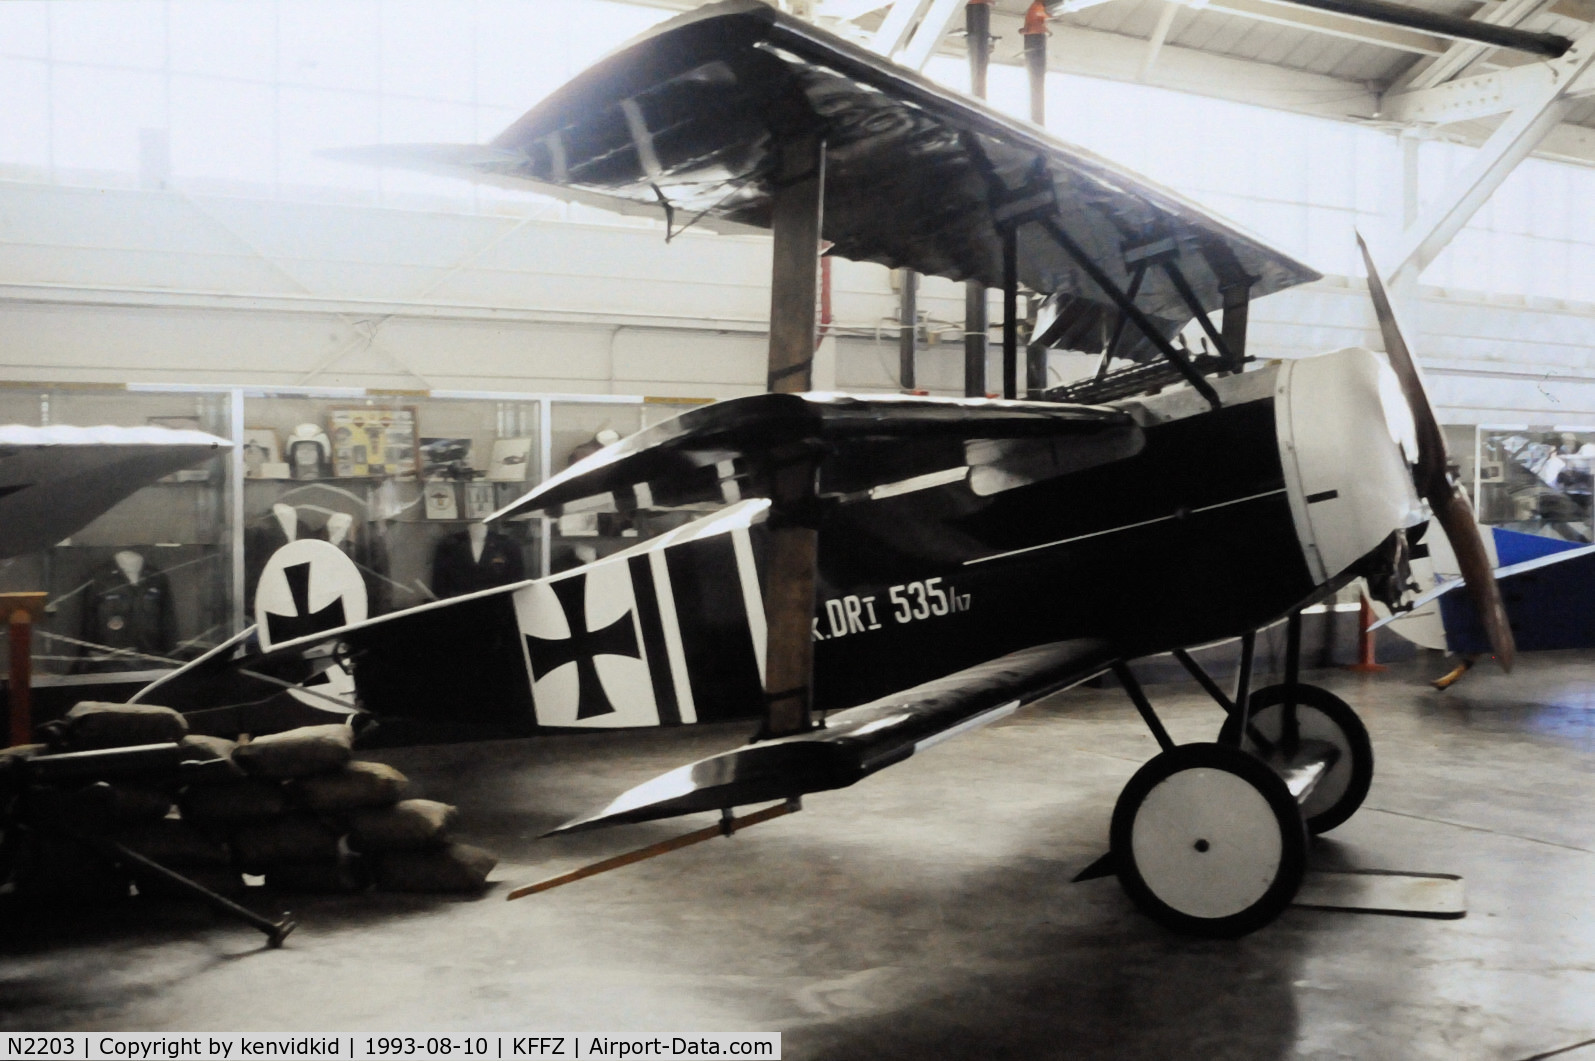 N2203, 1972 Fokker OR-1 C/N 535/17, At the Champlin Fighter Museum.